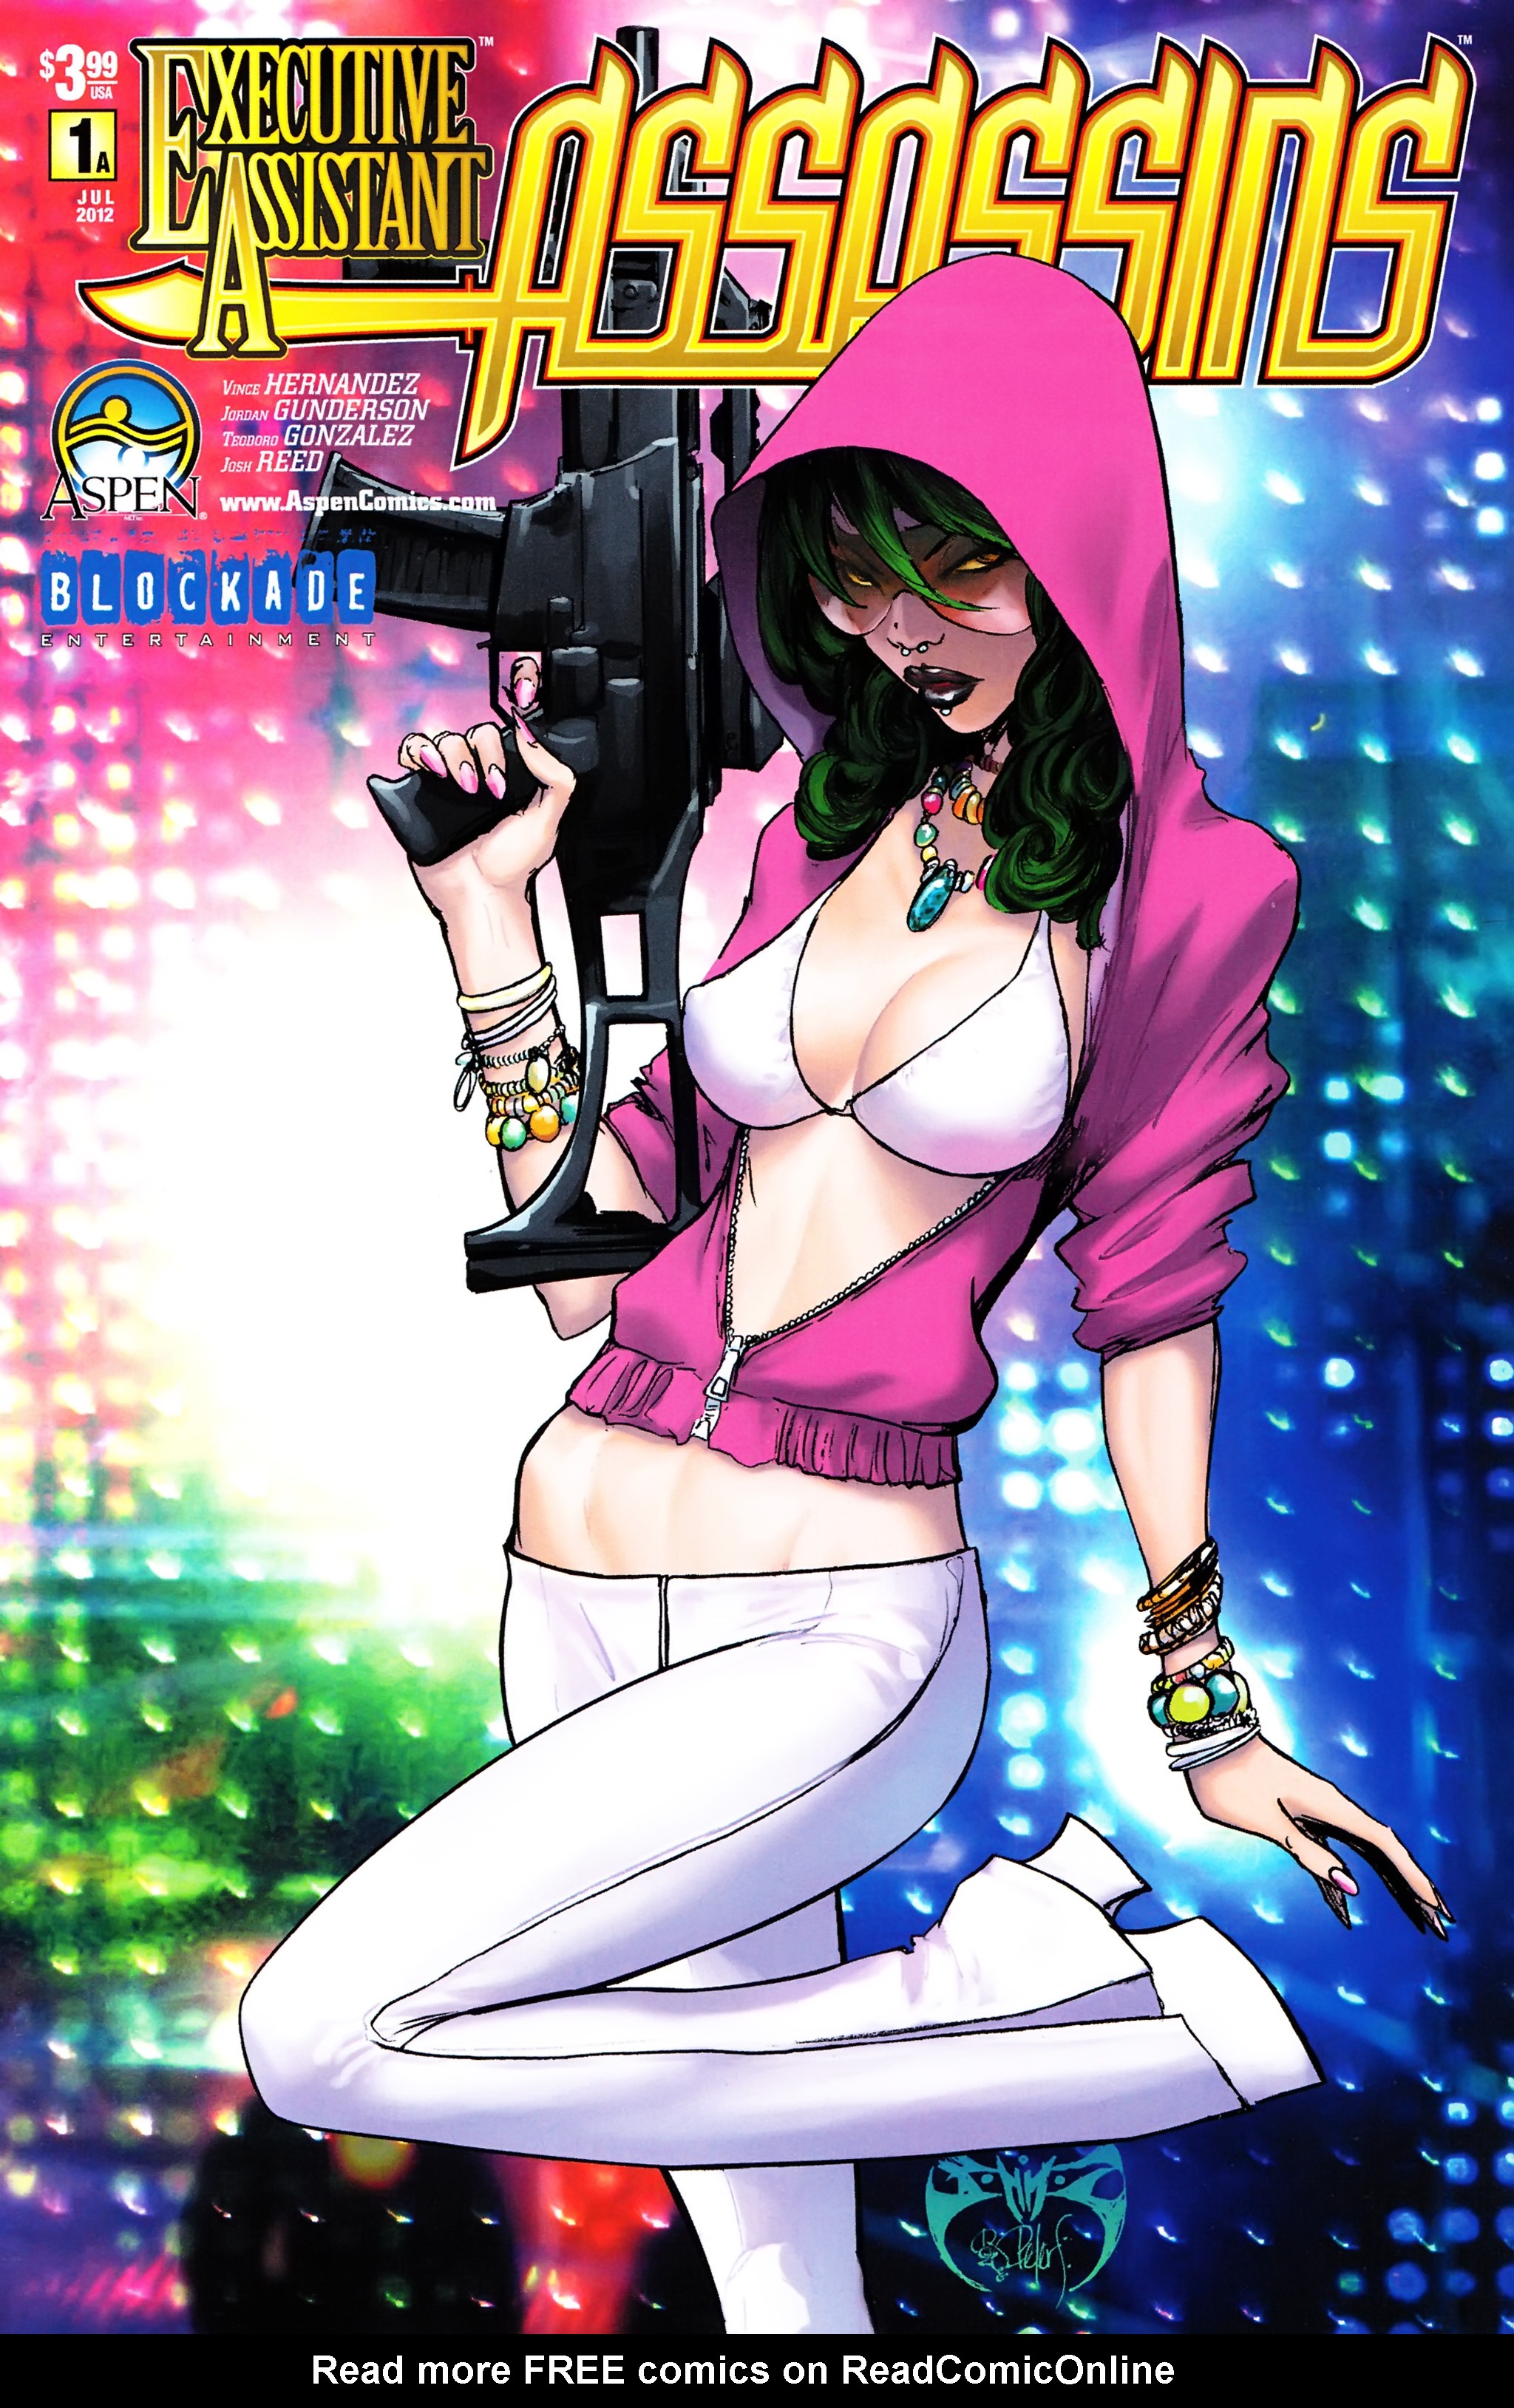 Read online Executive Assistant: Assassins comic -  Issue #1 - 1